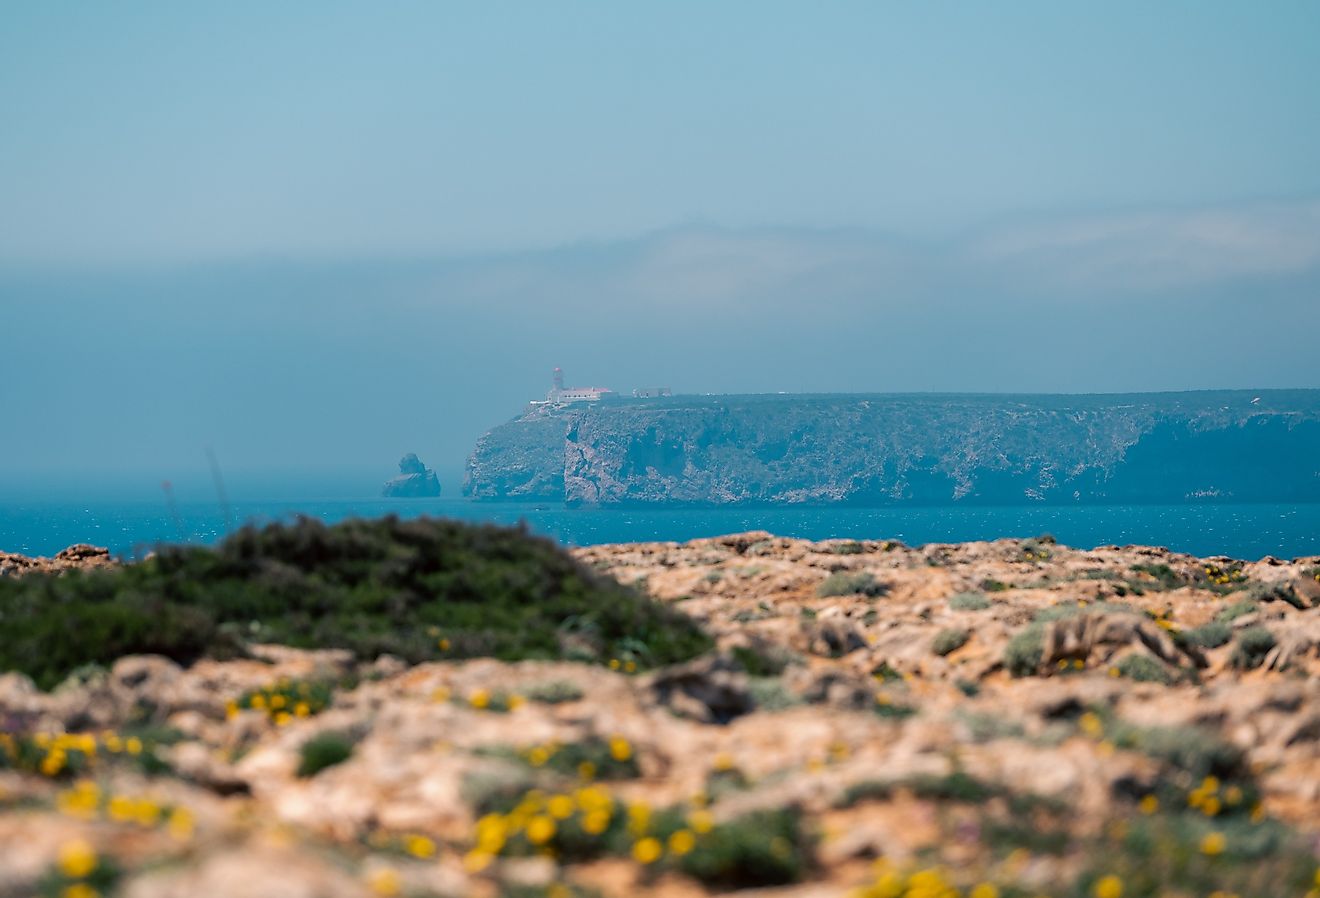 Cabo de San Vicente is a geographical feature located in the extreme southwest of Portugal, which marks the western limit of the Gulf of Cadiz. Image credit martinscphoto via AdobeStock.